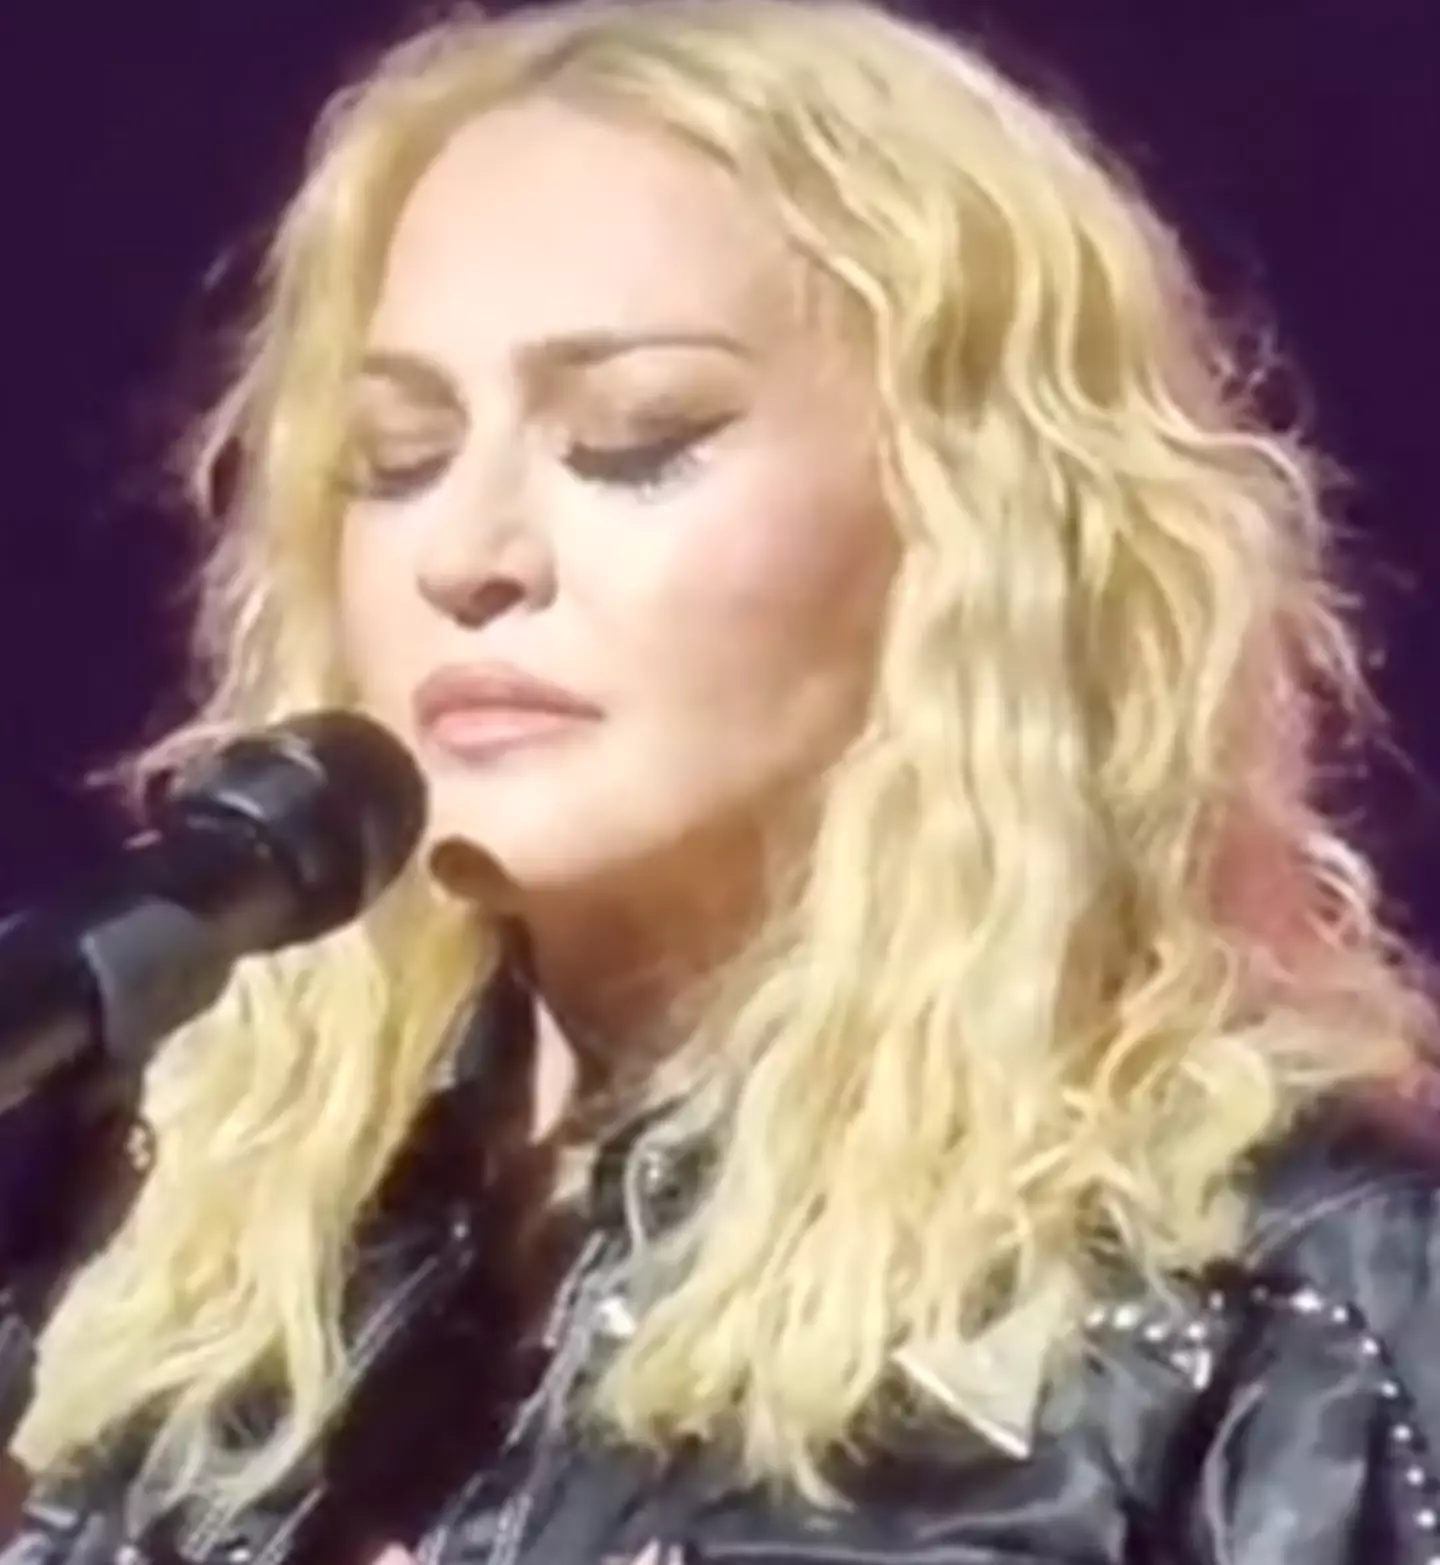 Madonna has admitted it’s a ‘f***ing miracle’ she’s here.